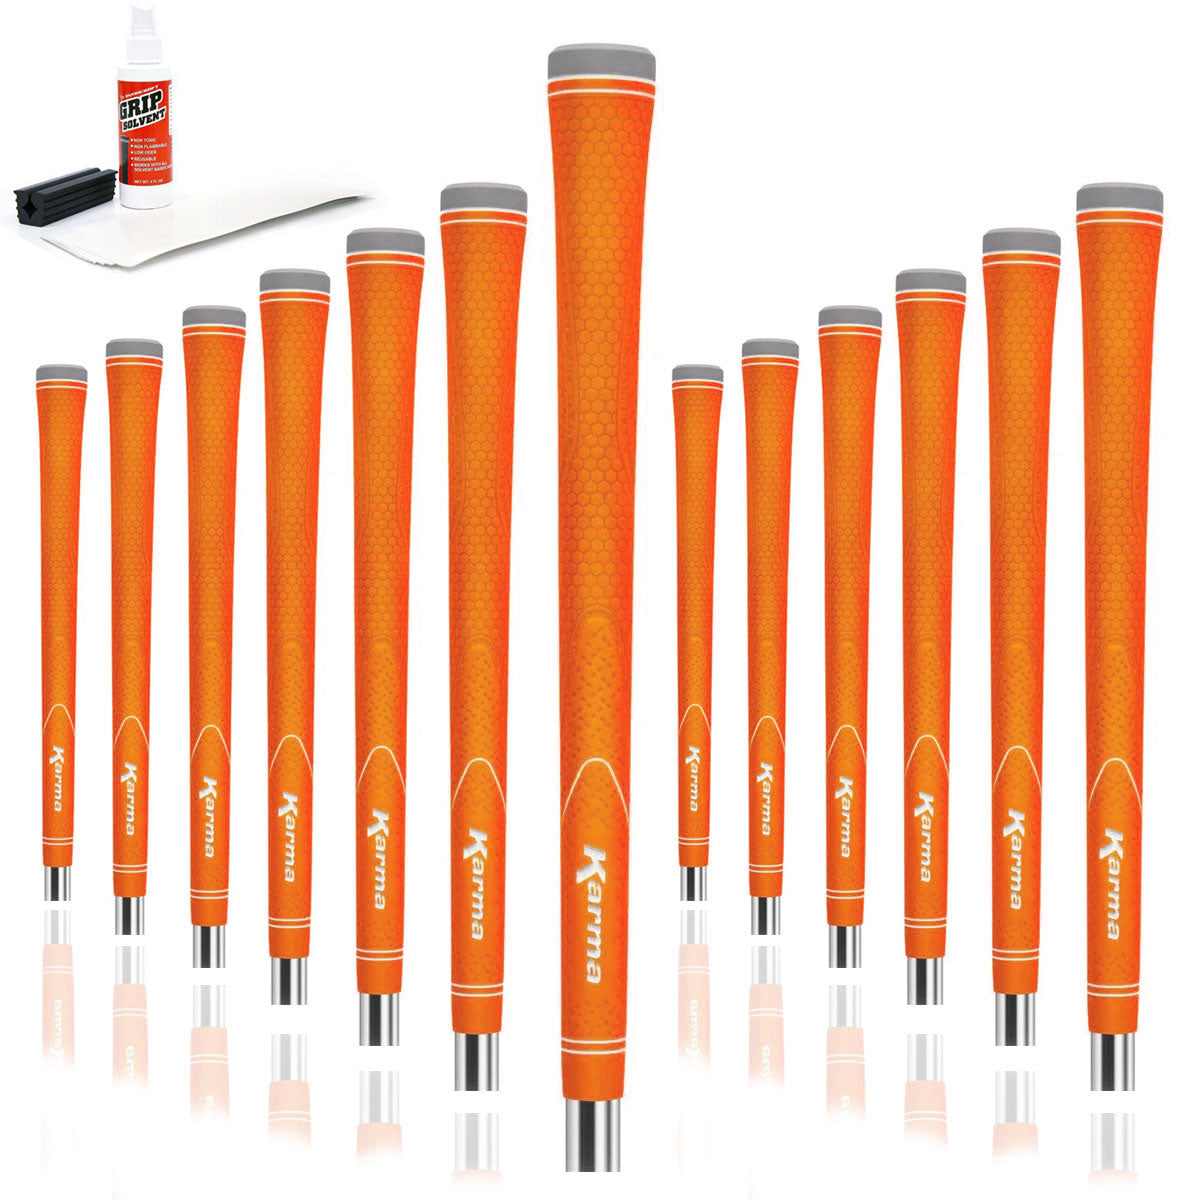 13 Karma Neion II orange golf grips, golf grip tape strips, bottle of grip solvent and rubber shaft clamp